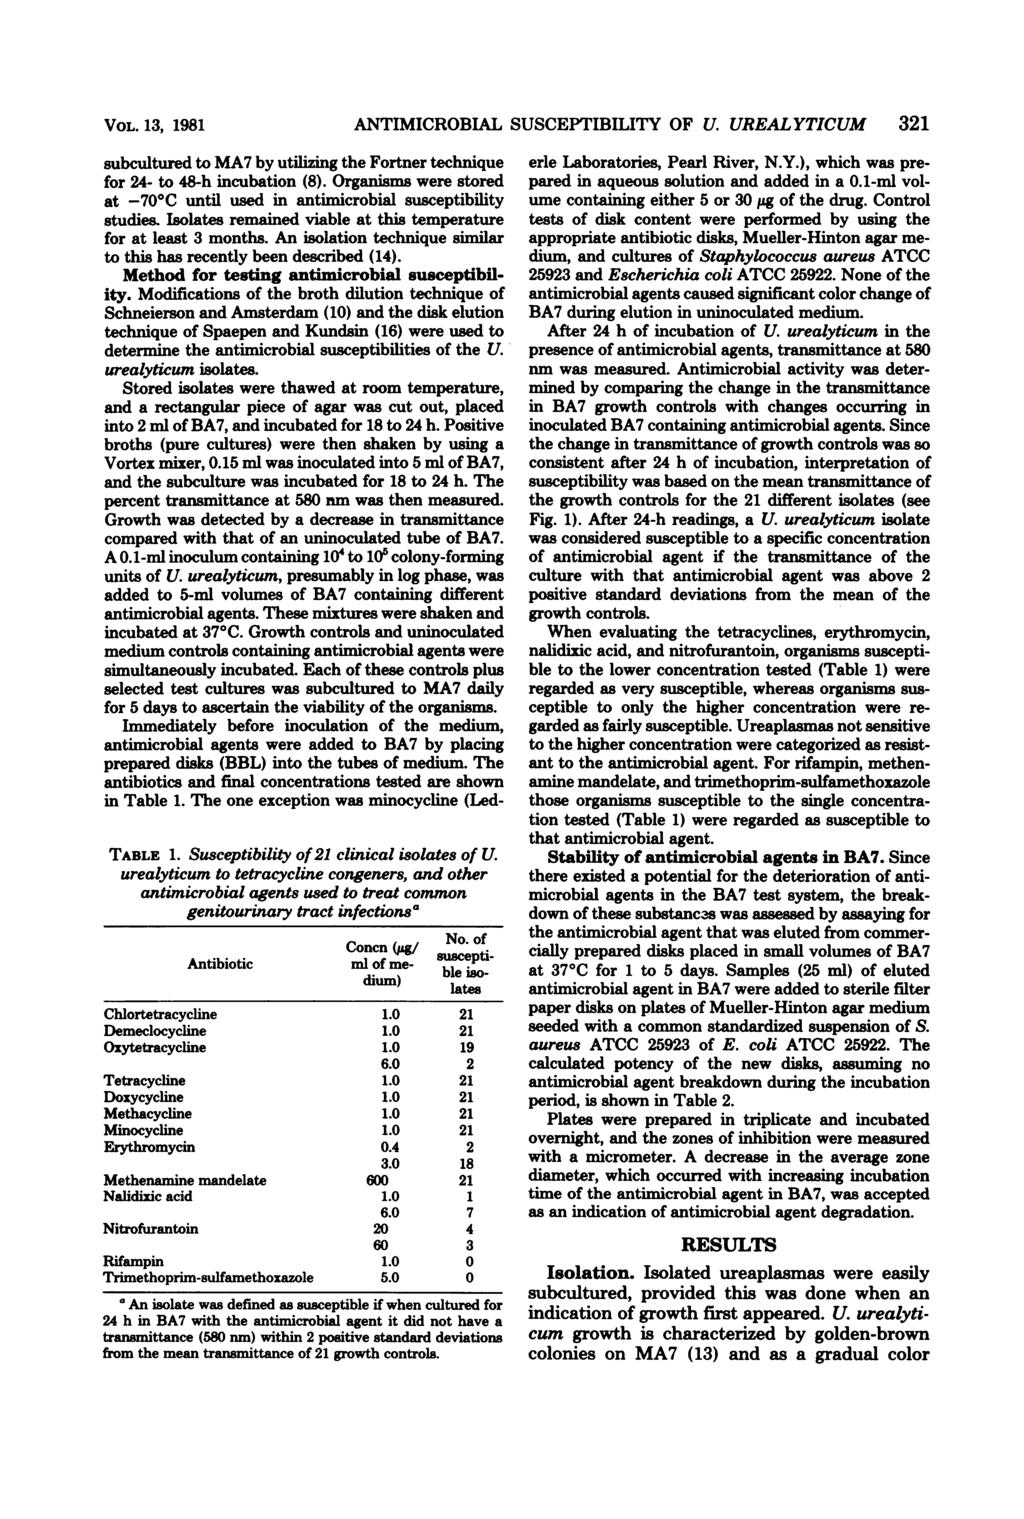 VOL. 13, 1981 subcultured to MA7 by utilizing the Fortner technique for 24- to 48-h incubation (8). Organisms were stored at -70 C until used in antimicrobial susceptibility studies.